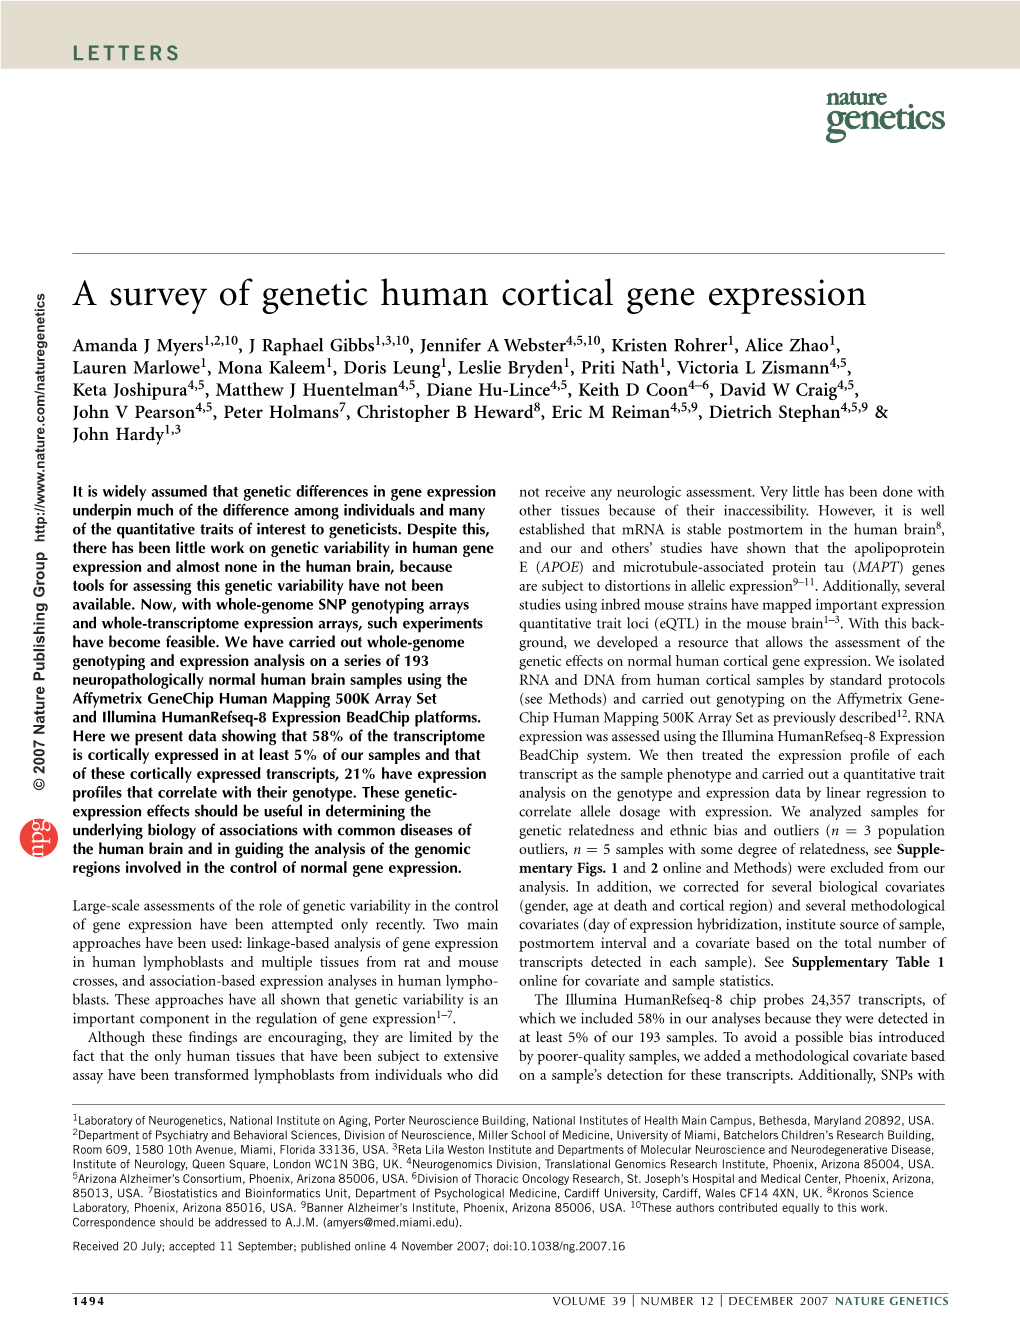 A Survey of Genetic Human Cortical Gene Expression